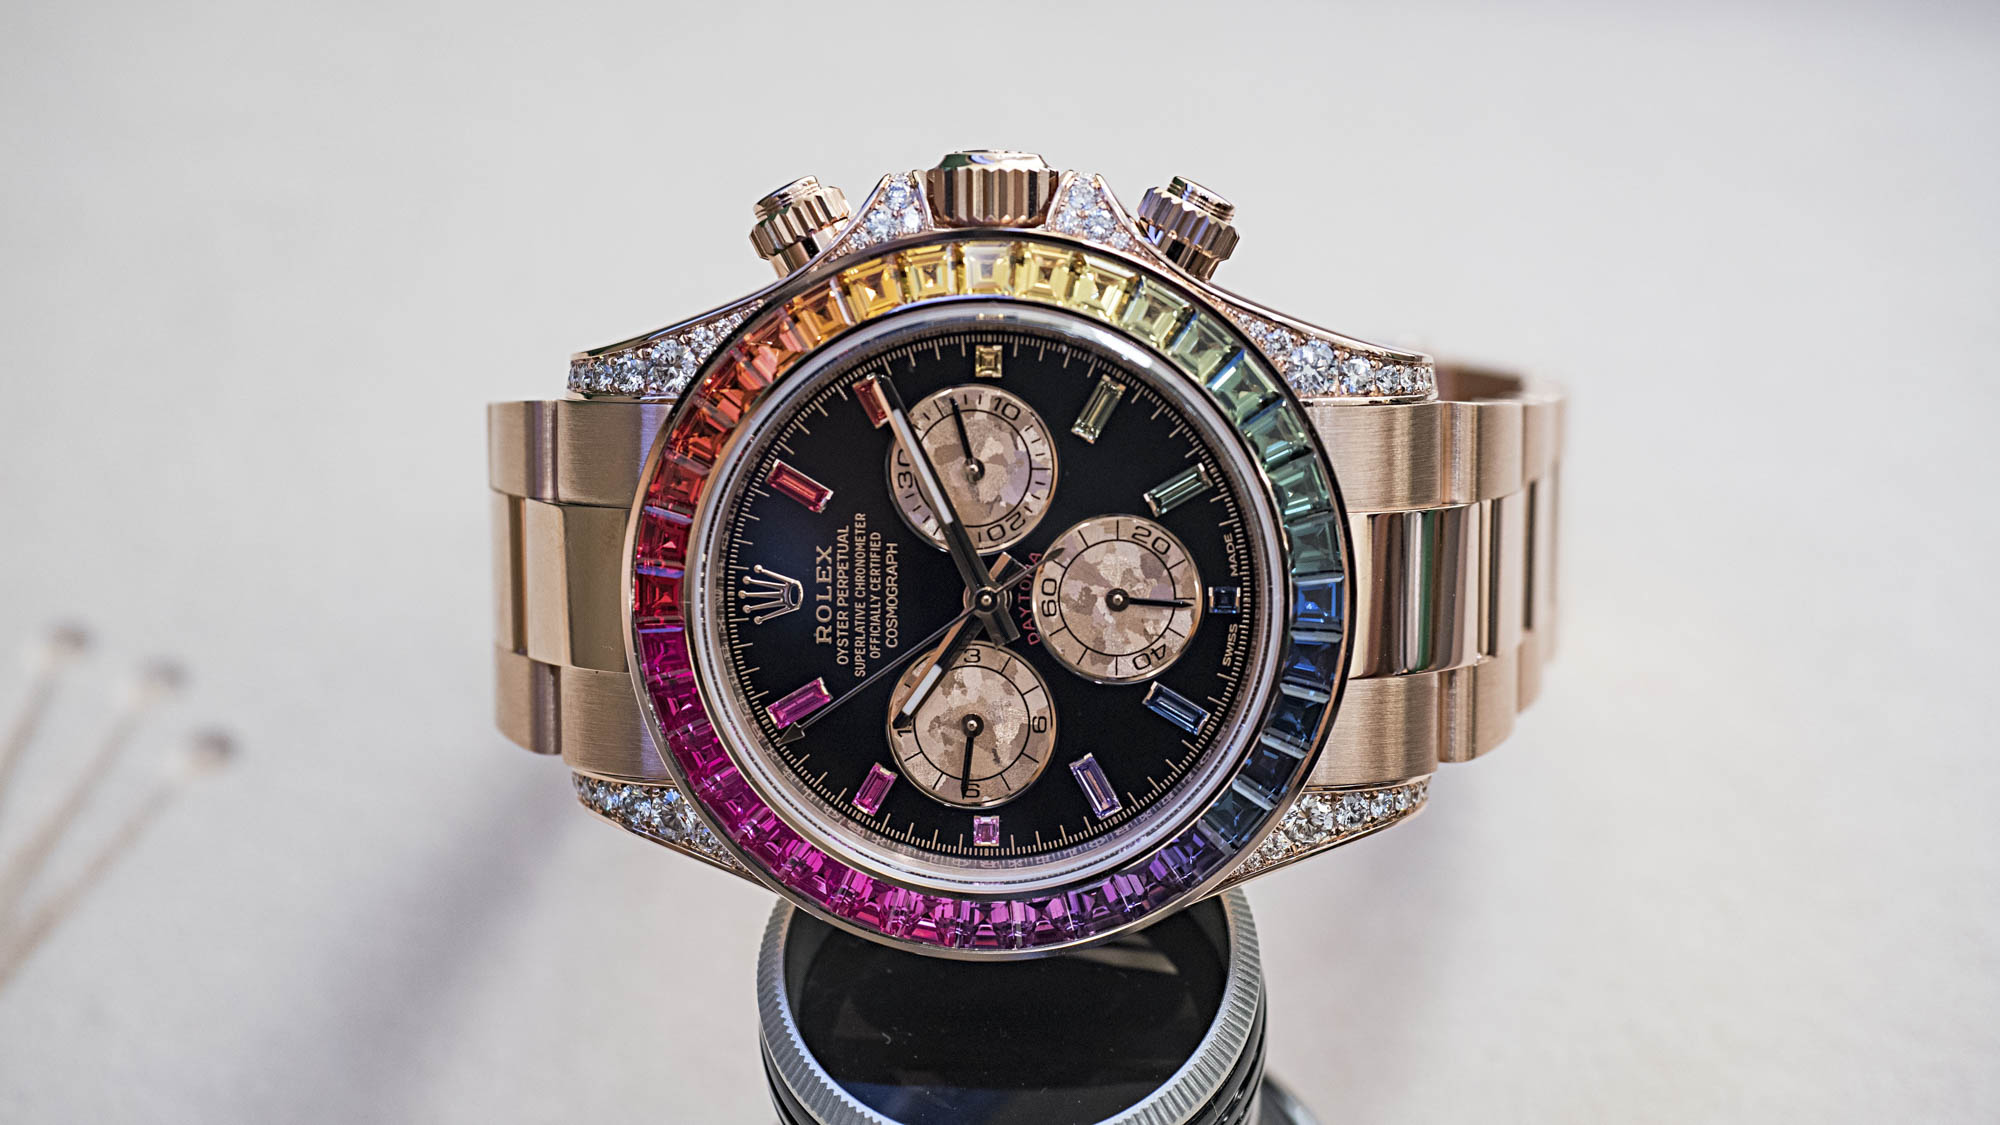 Rainbow Daytona Review Hand-On With the Most Extreme New Rolex